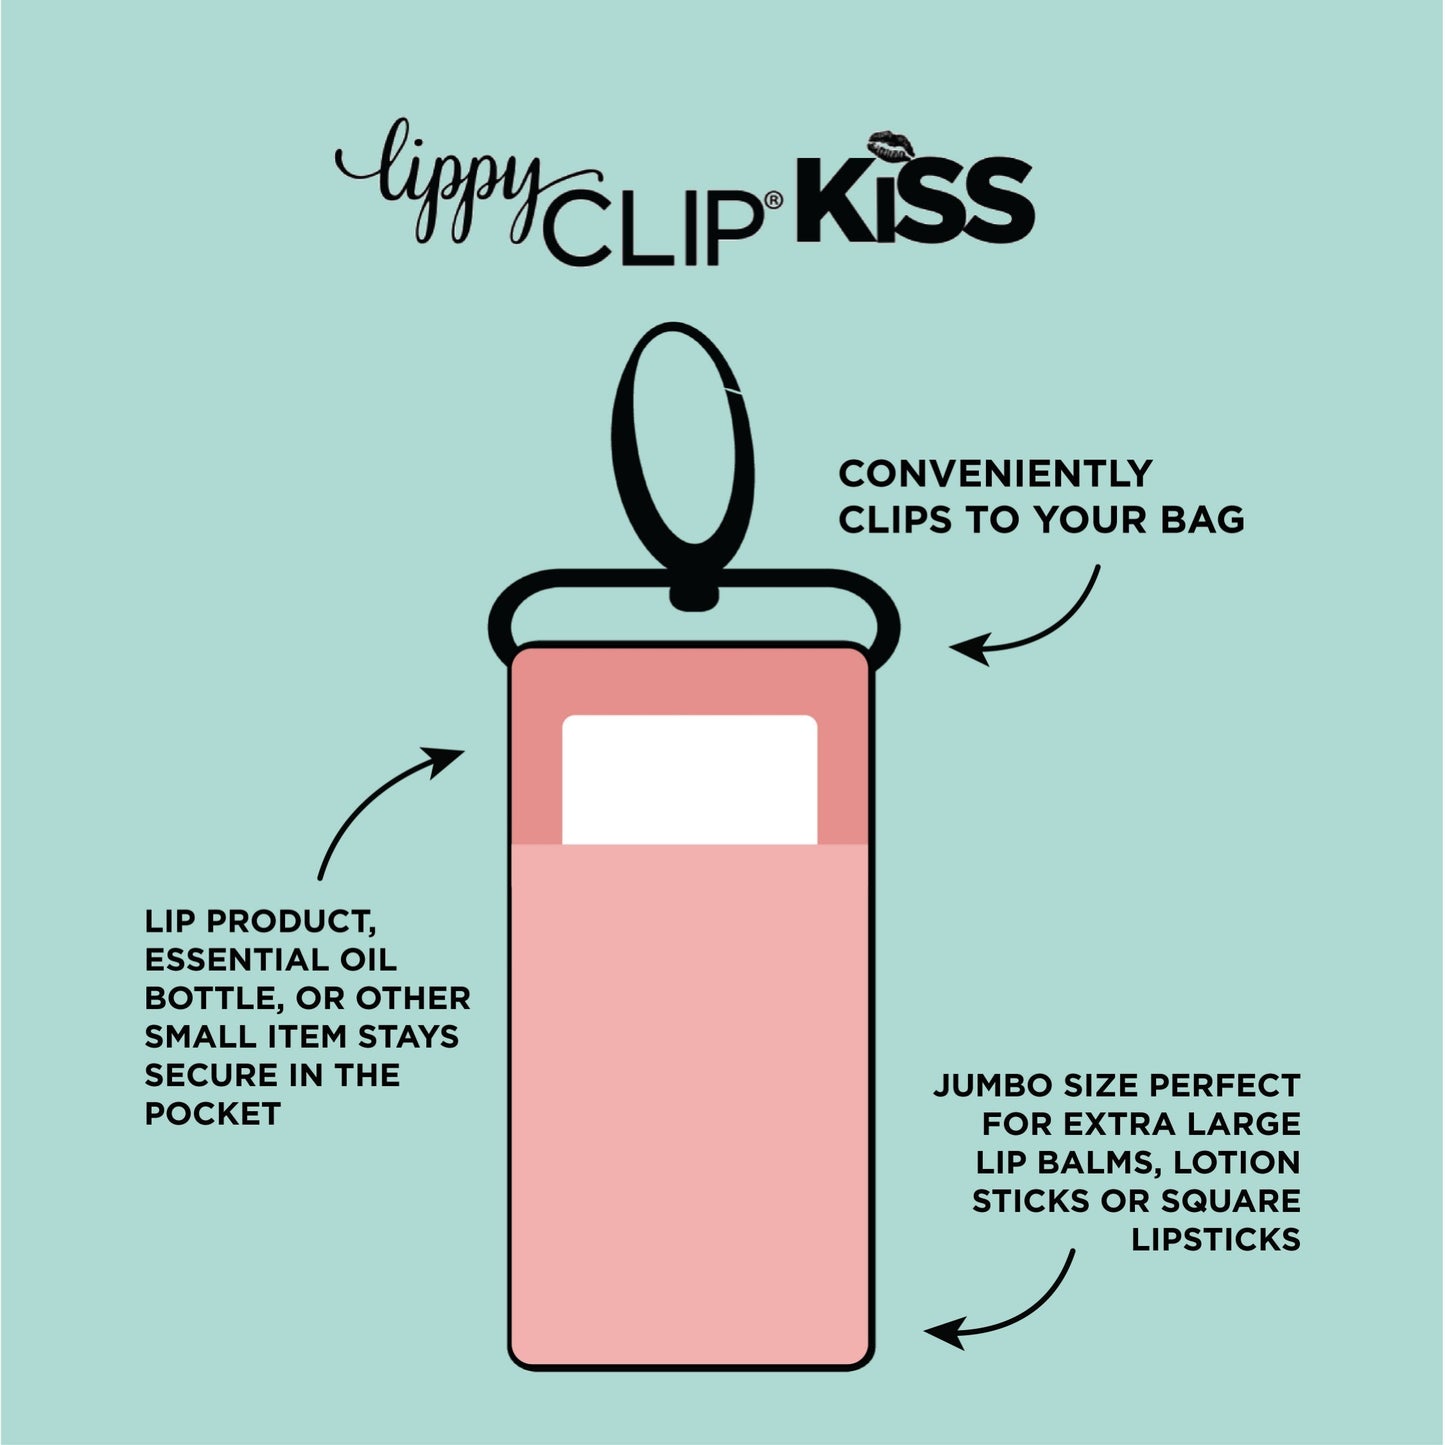 CLASSIC: Cherry Red LippyClipKISS for larger lip balms, essential oil rollers, and more